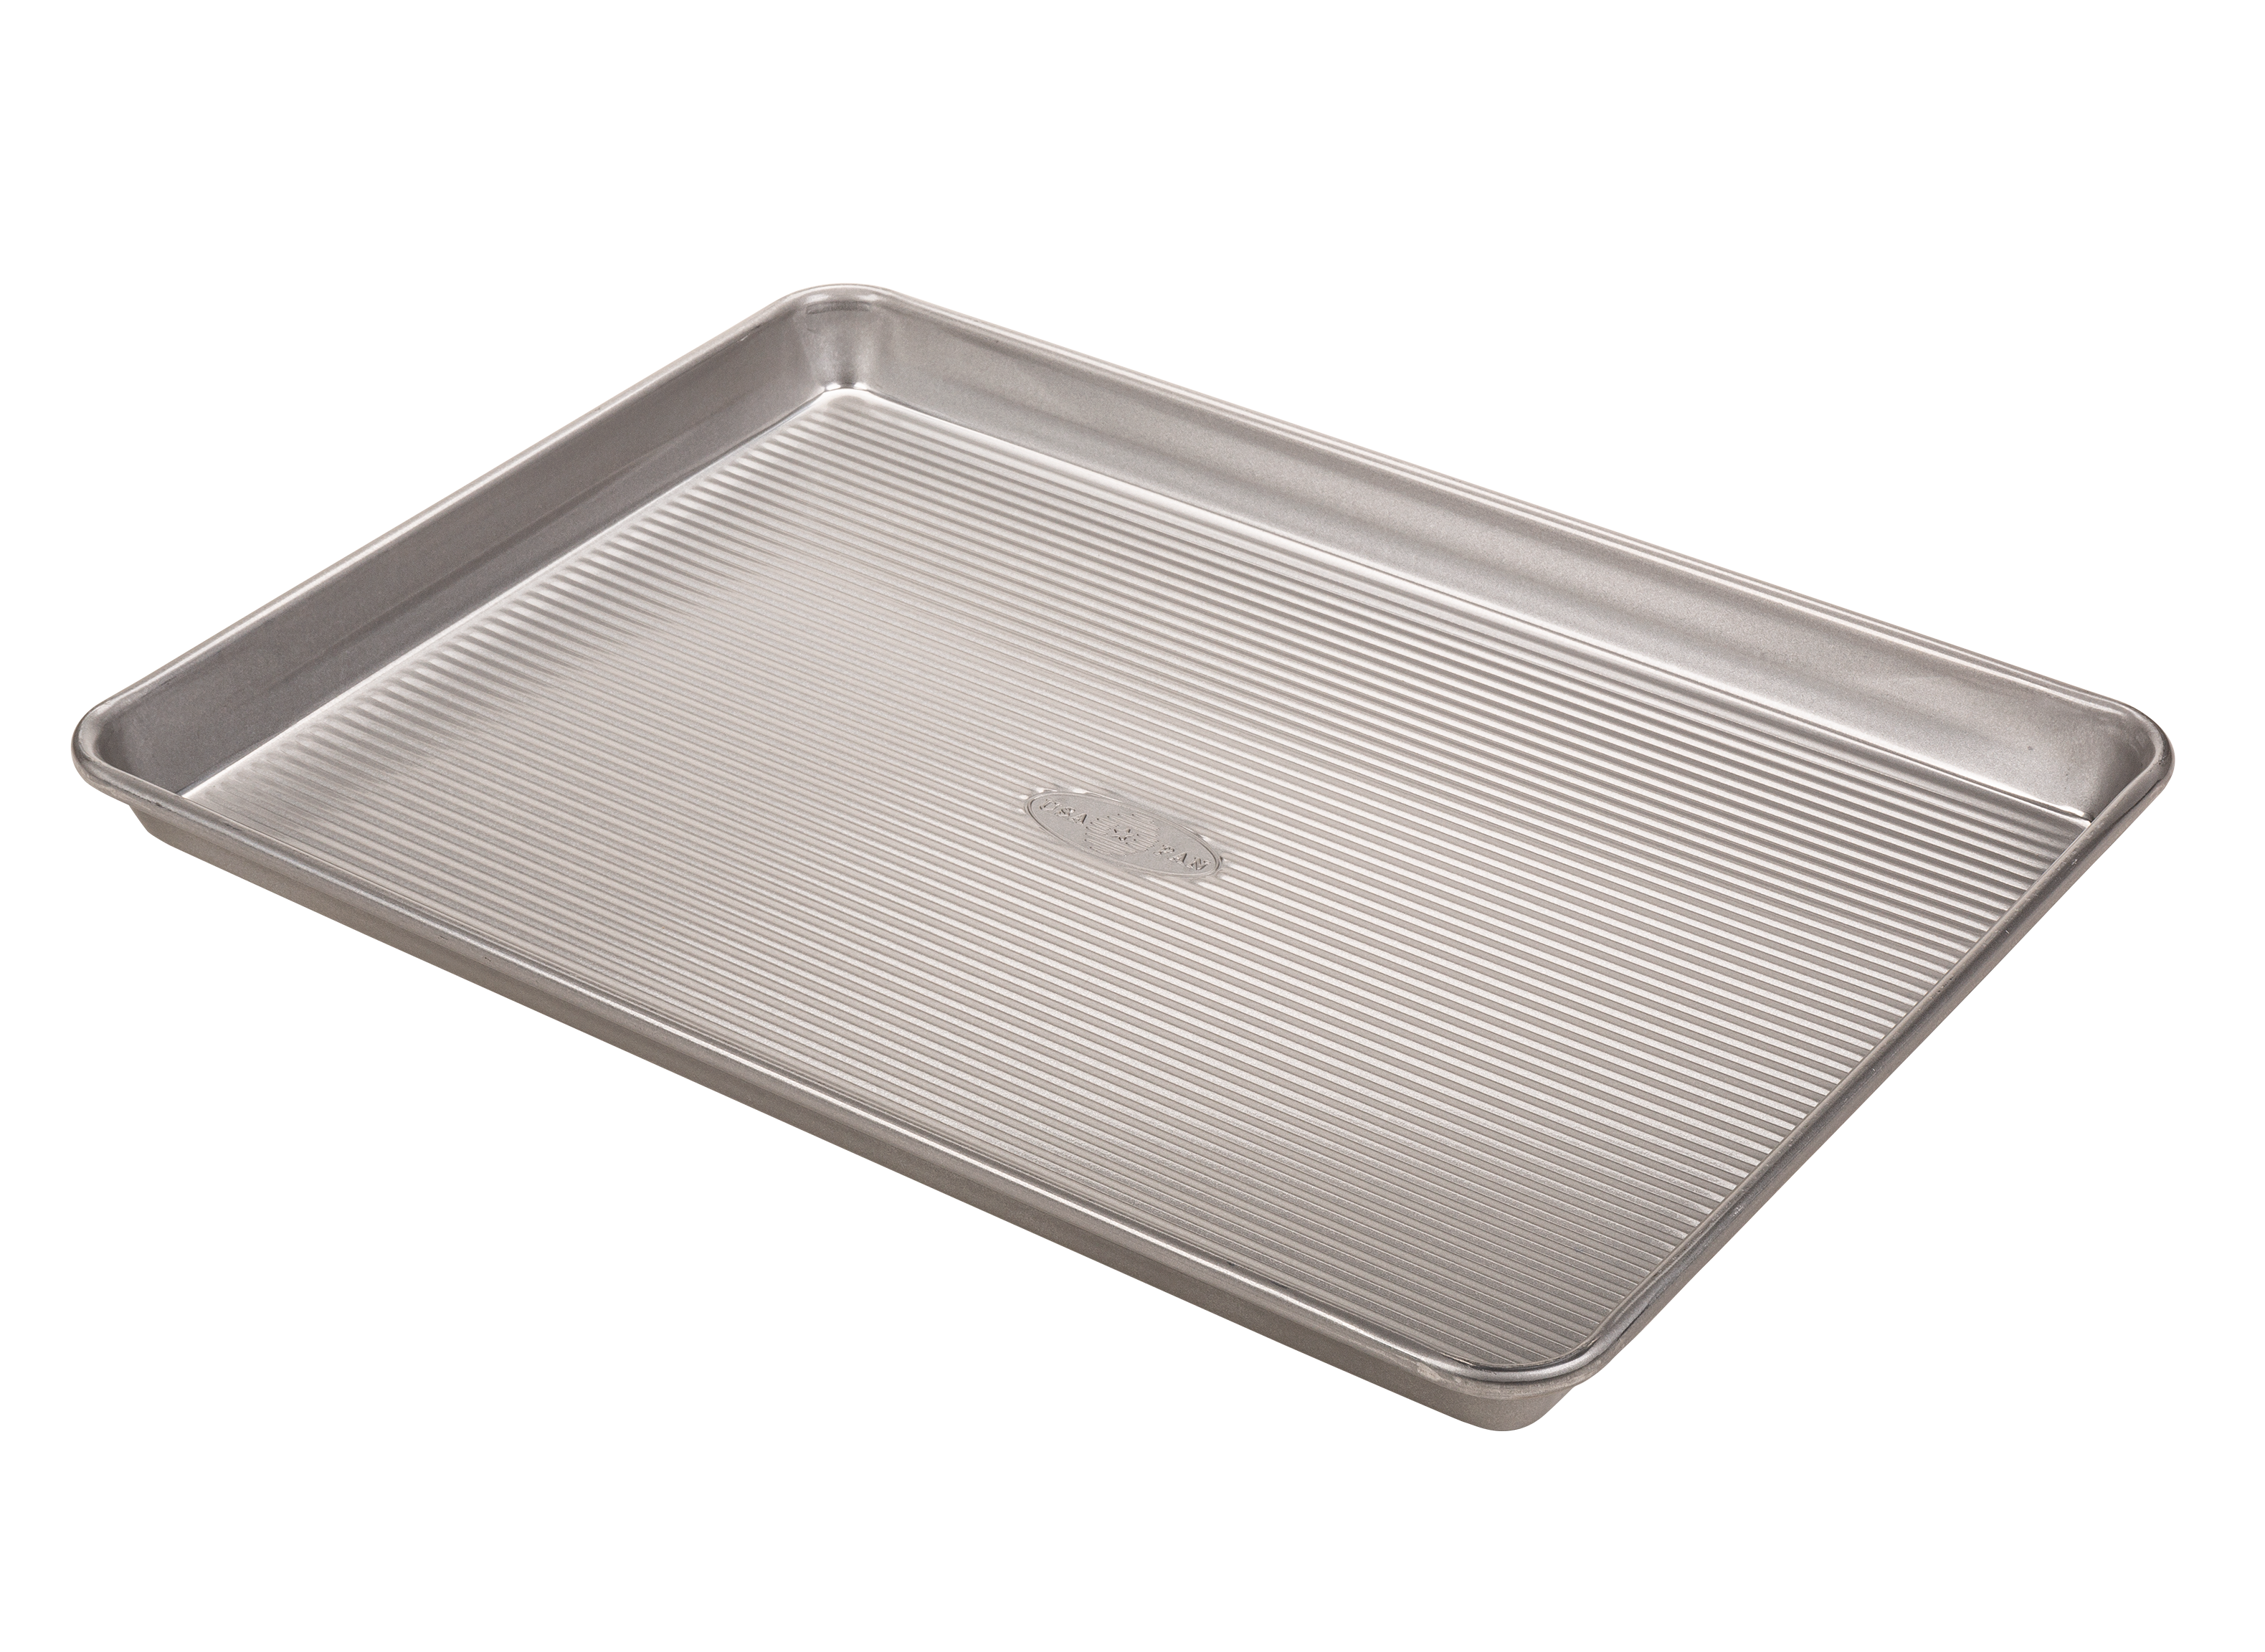 https://crdms.images.consumerreports.org/prod/products/cr/models/404180-sheet-pans-usa-pan-pro-line-non-stick-baking-sheet-10022114.png